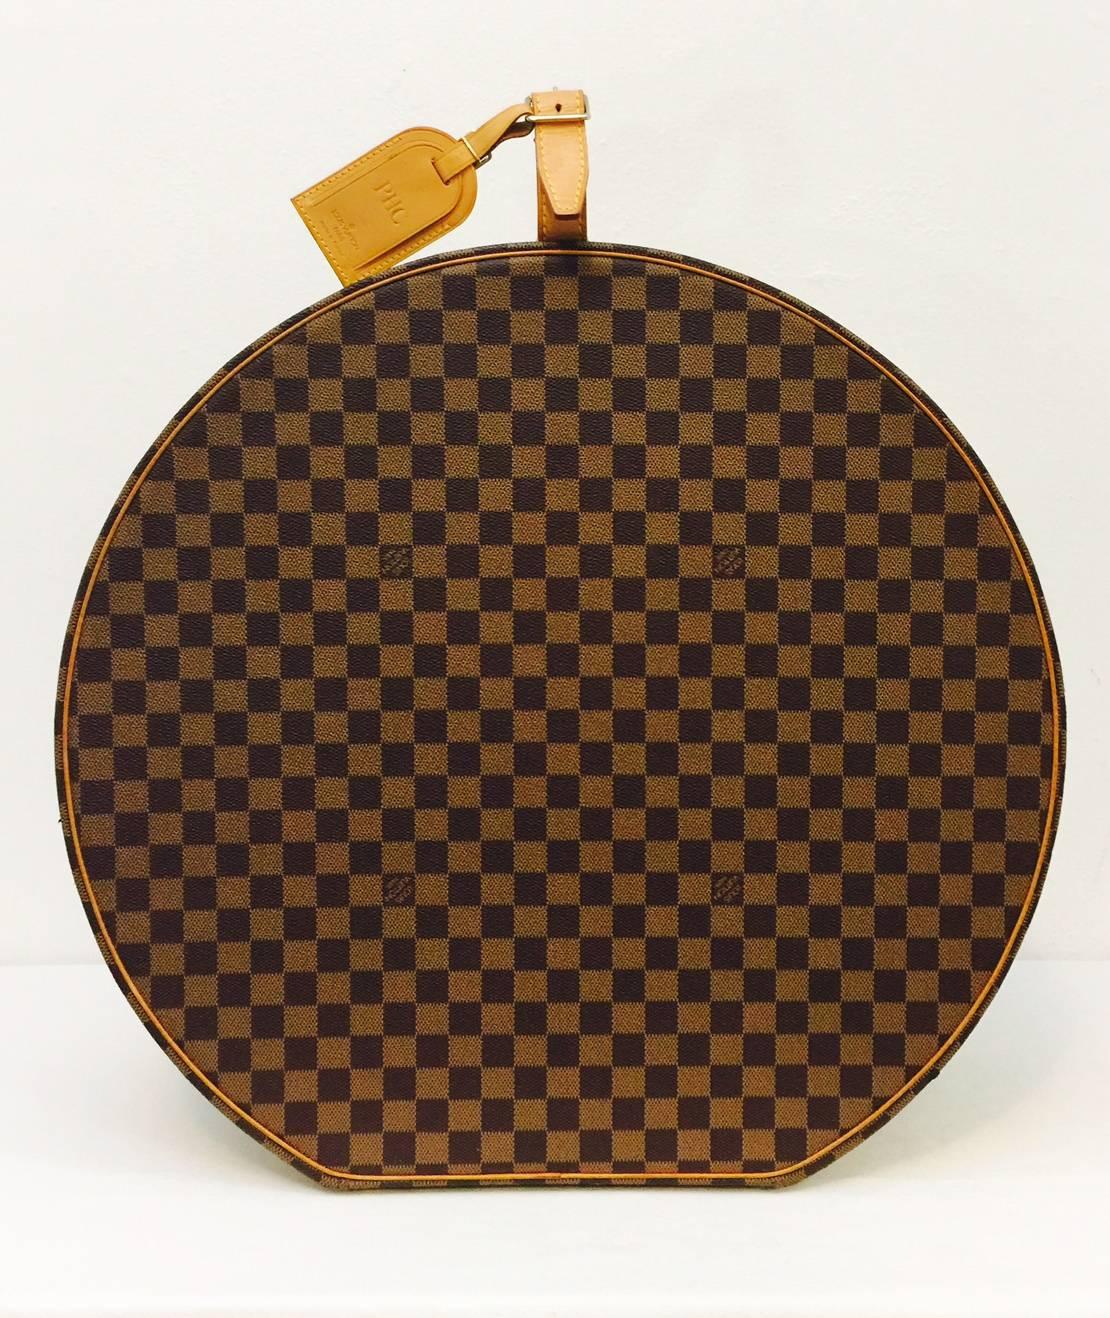 The Louis Vuitton Boite Chapeaux Damier Ebene 50 Travel Round Case is more commonly known as the 